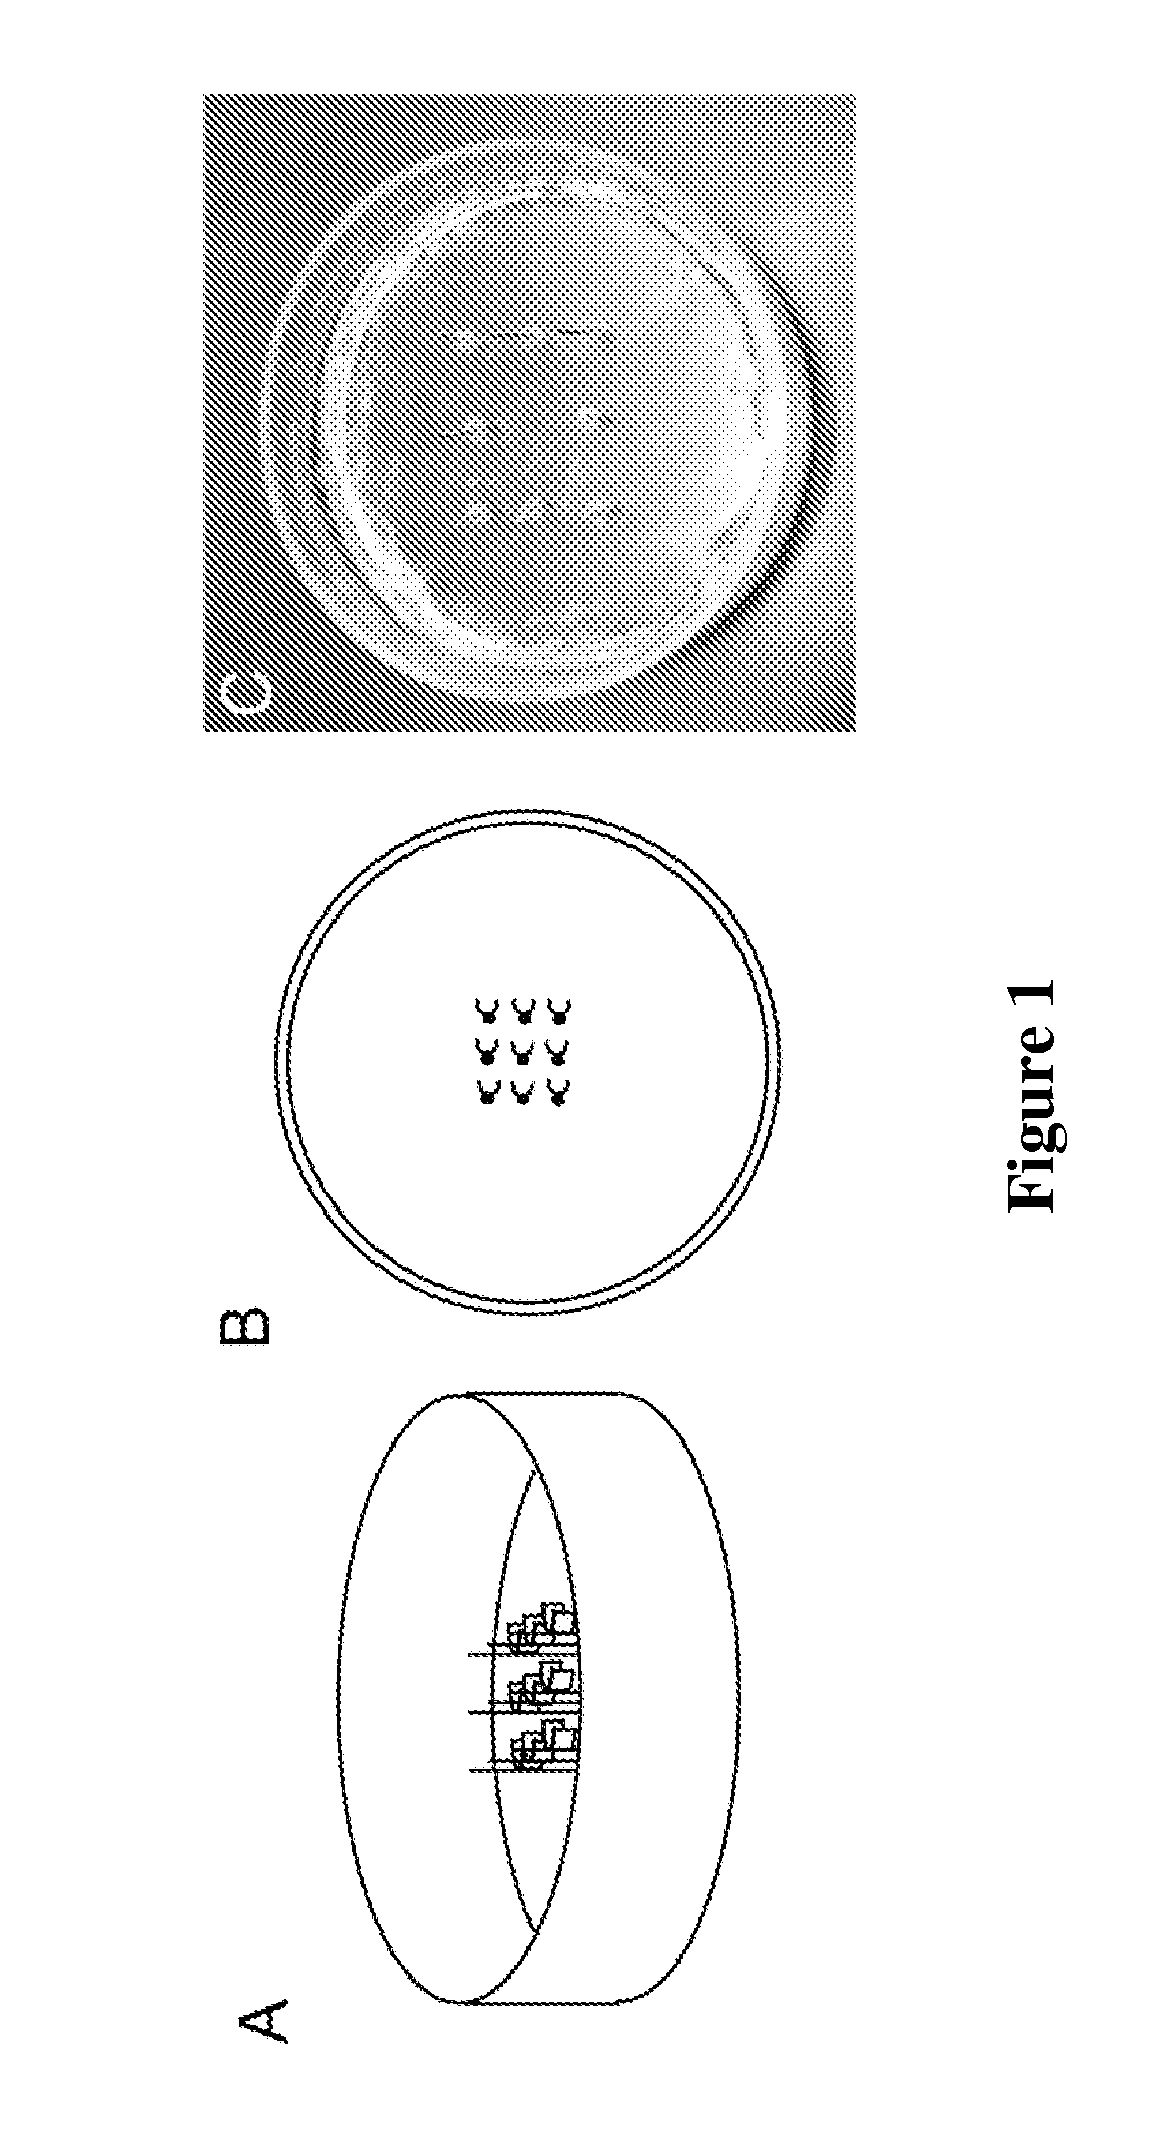 High throughput assays for determining contractile function and devices for use therein